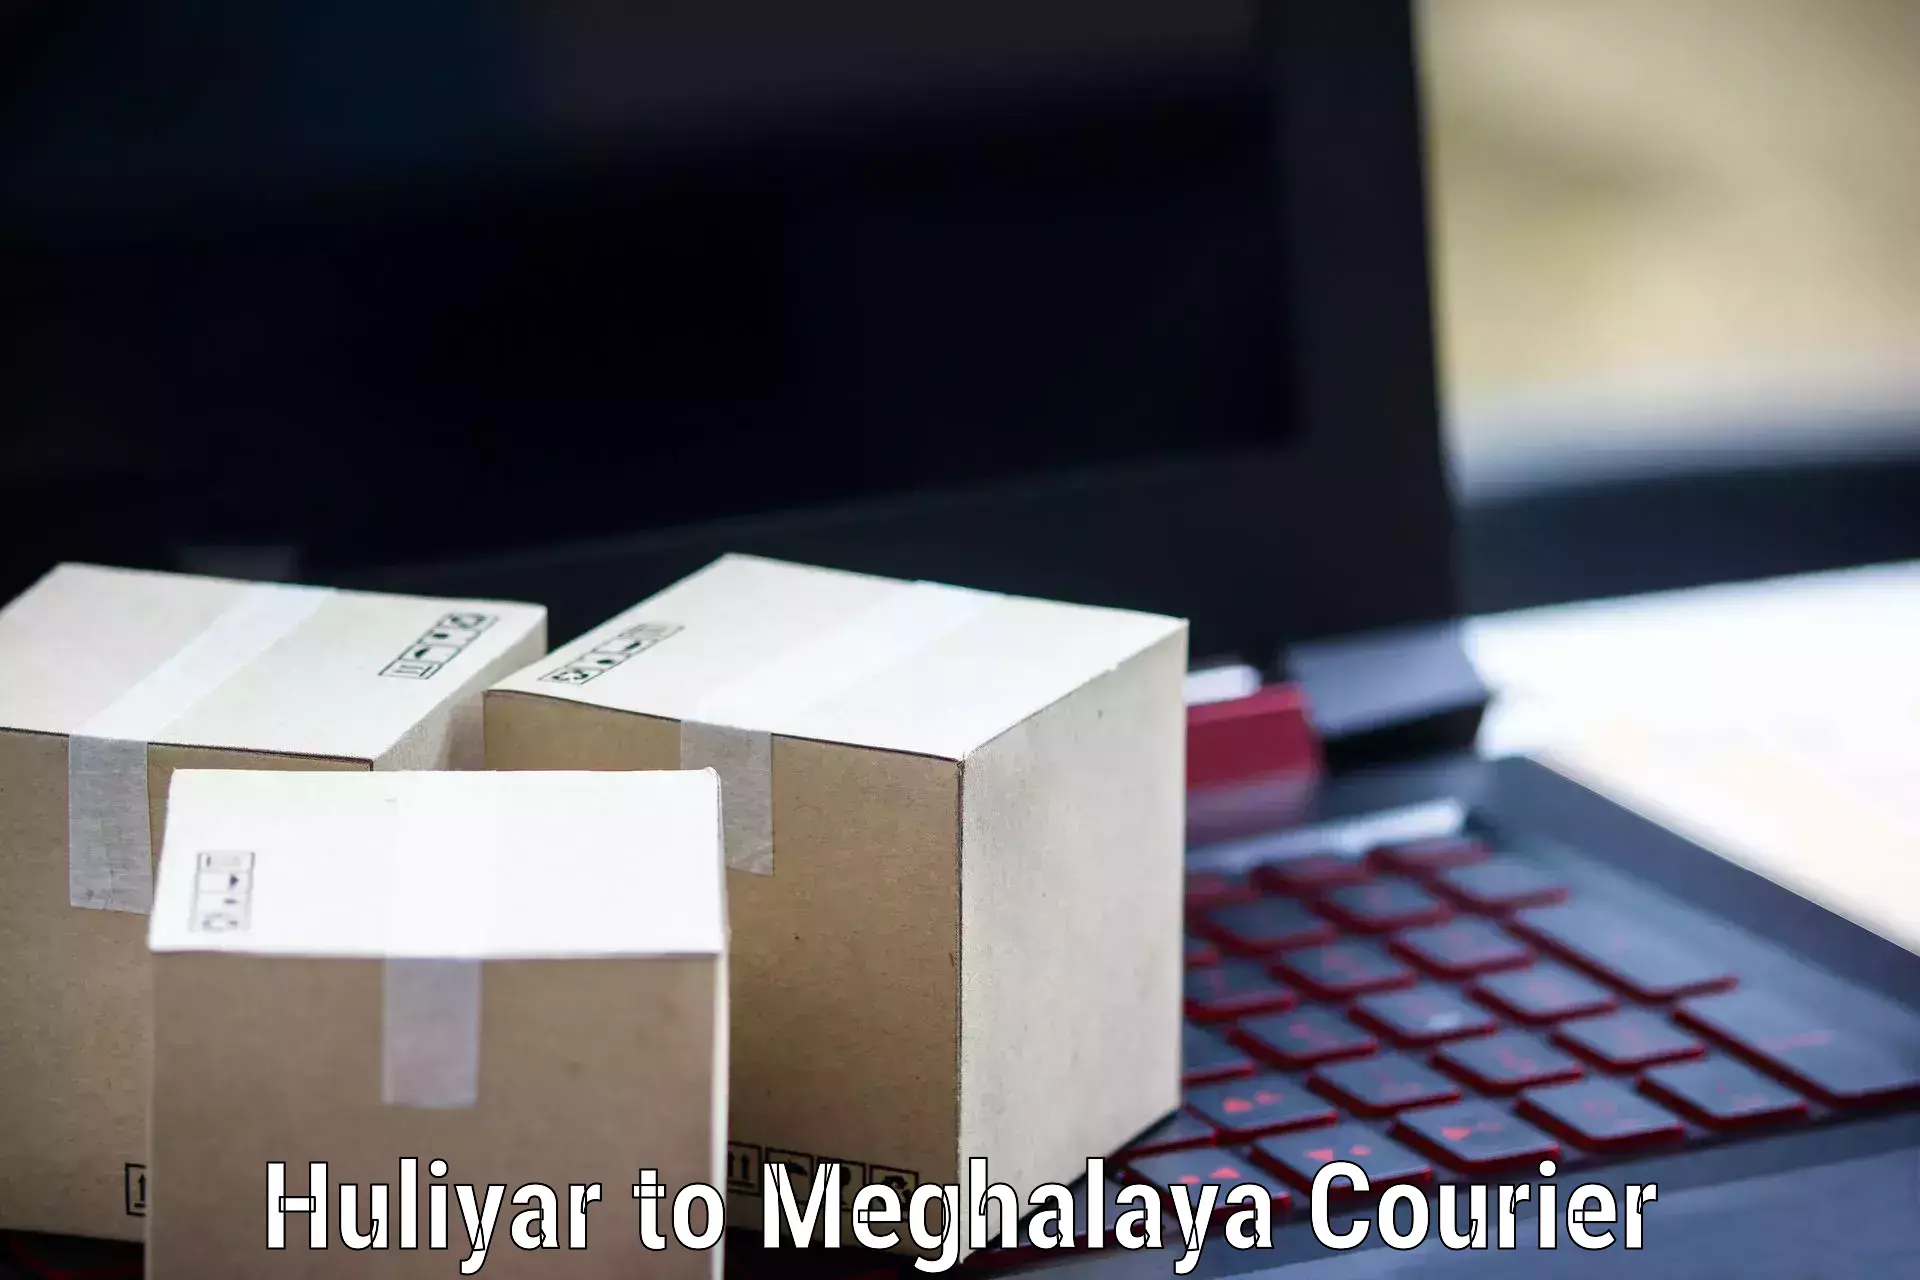 Courier service innovation Huliyar to Dkhiah West